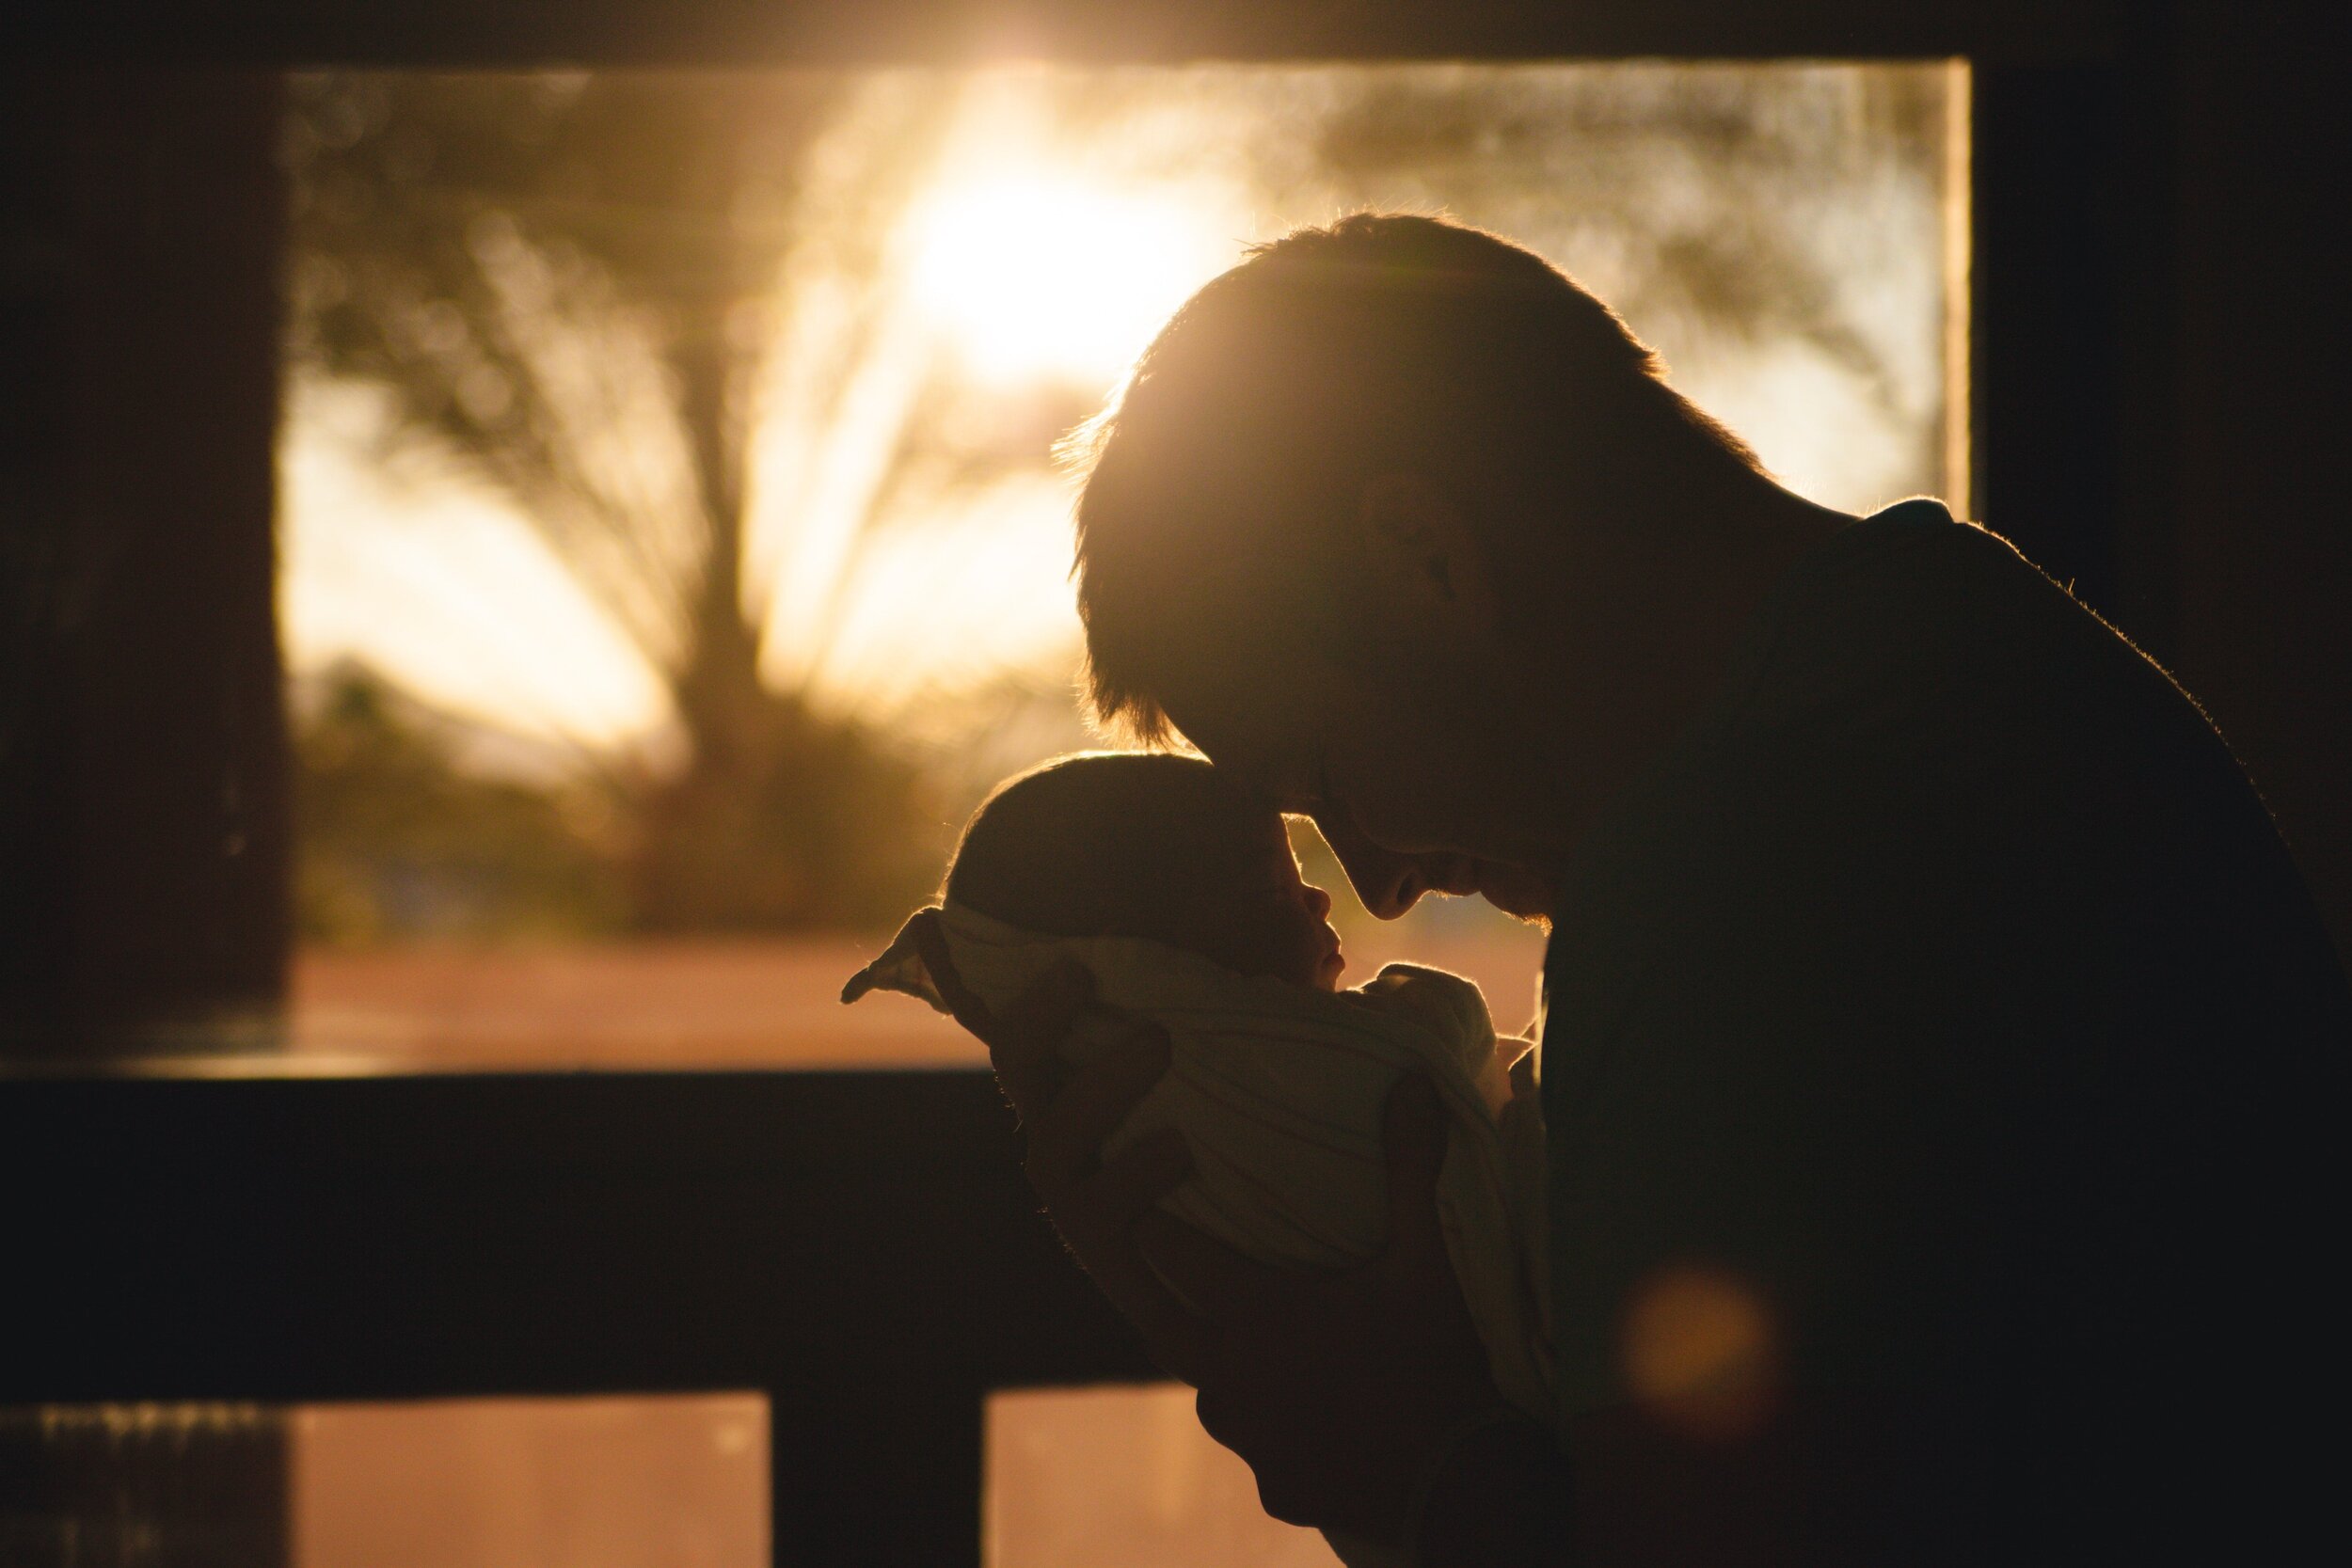 father touches forehead to his newborn baby's forehead during sunset